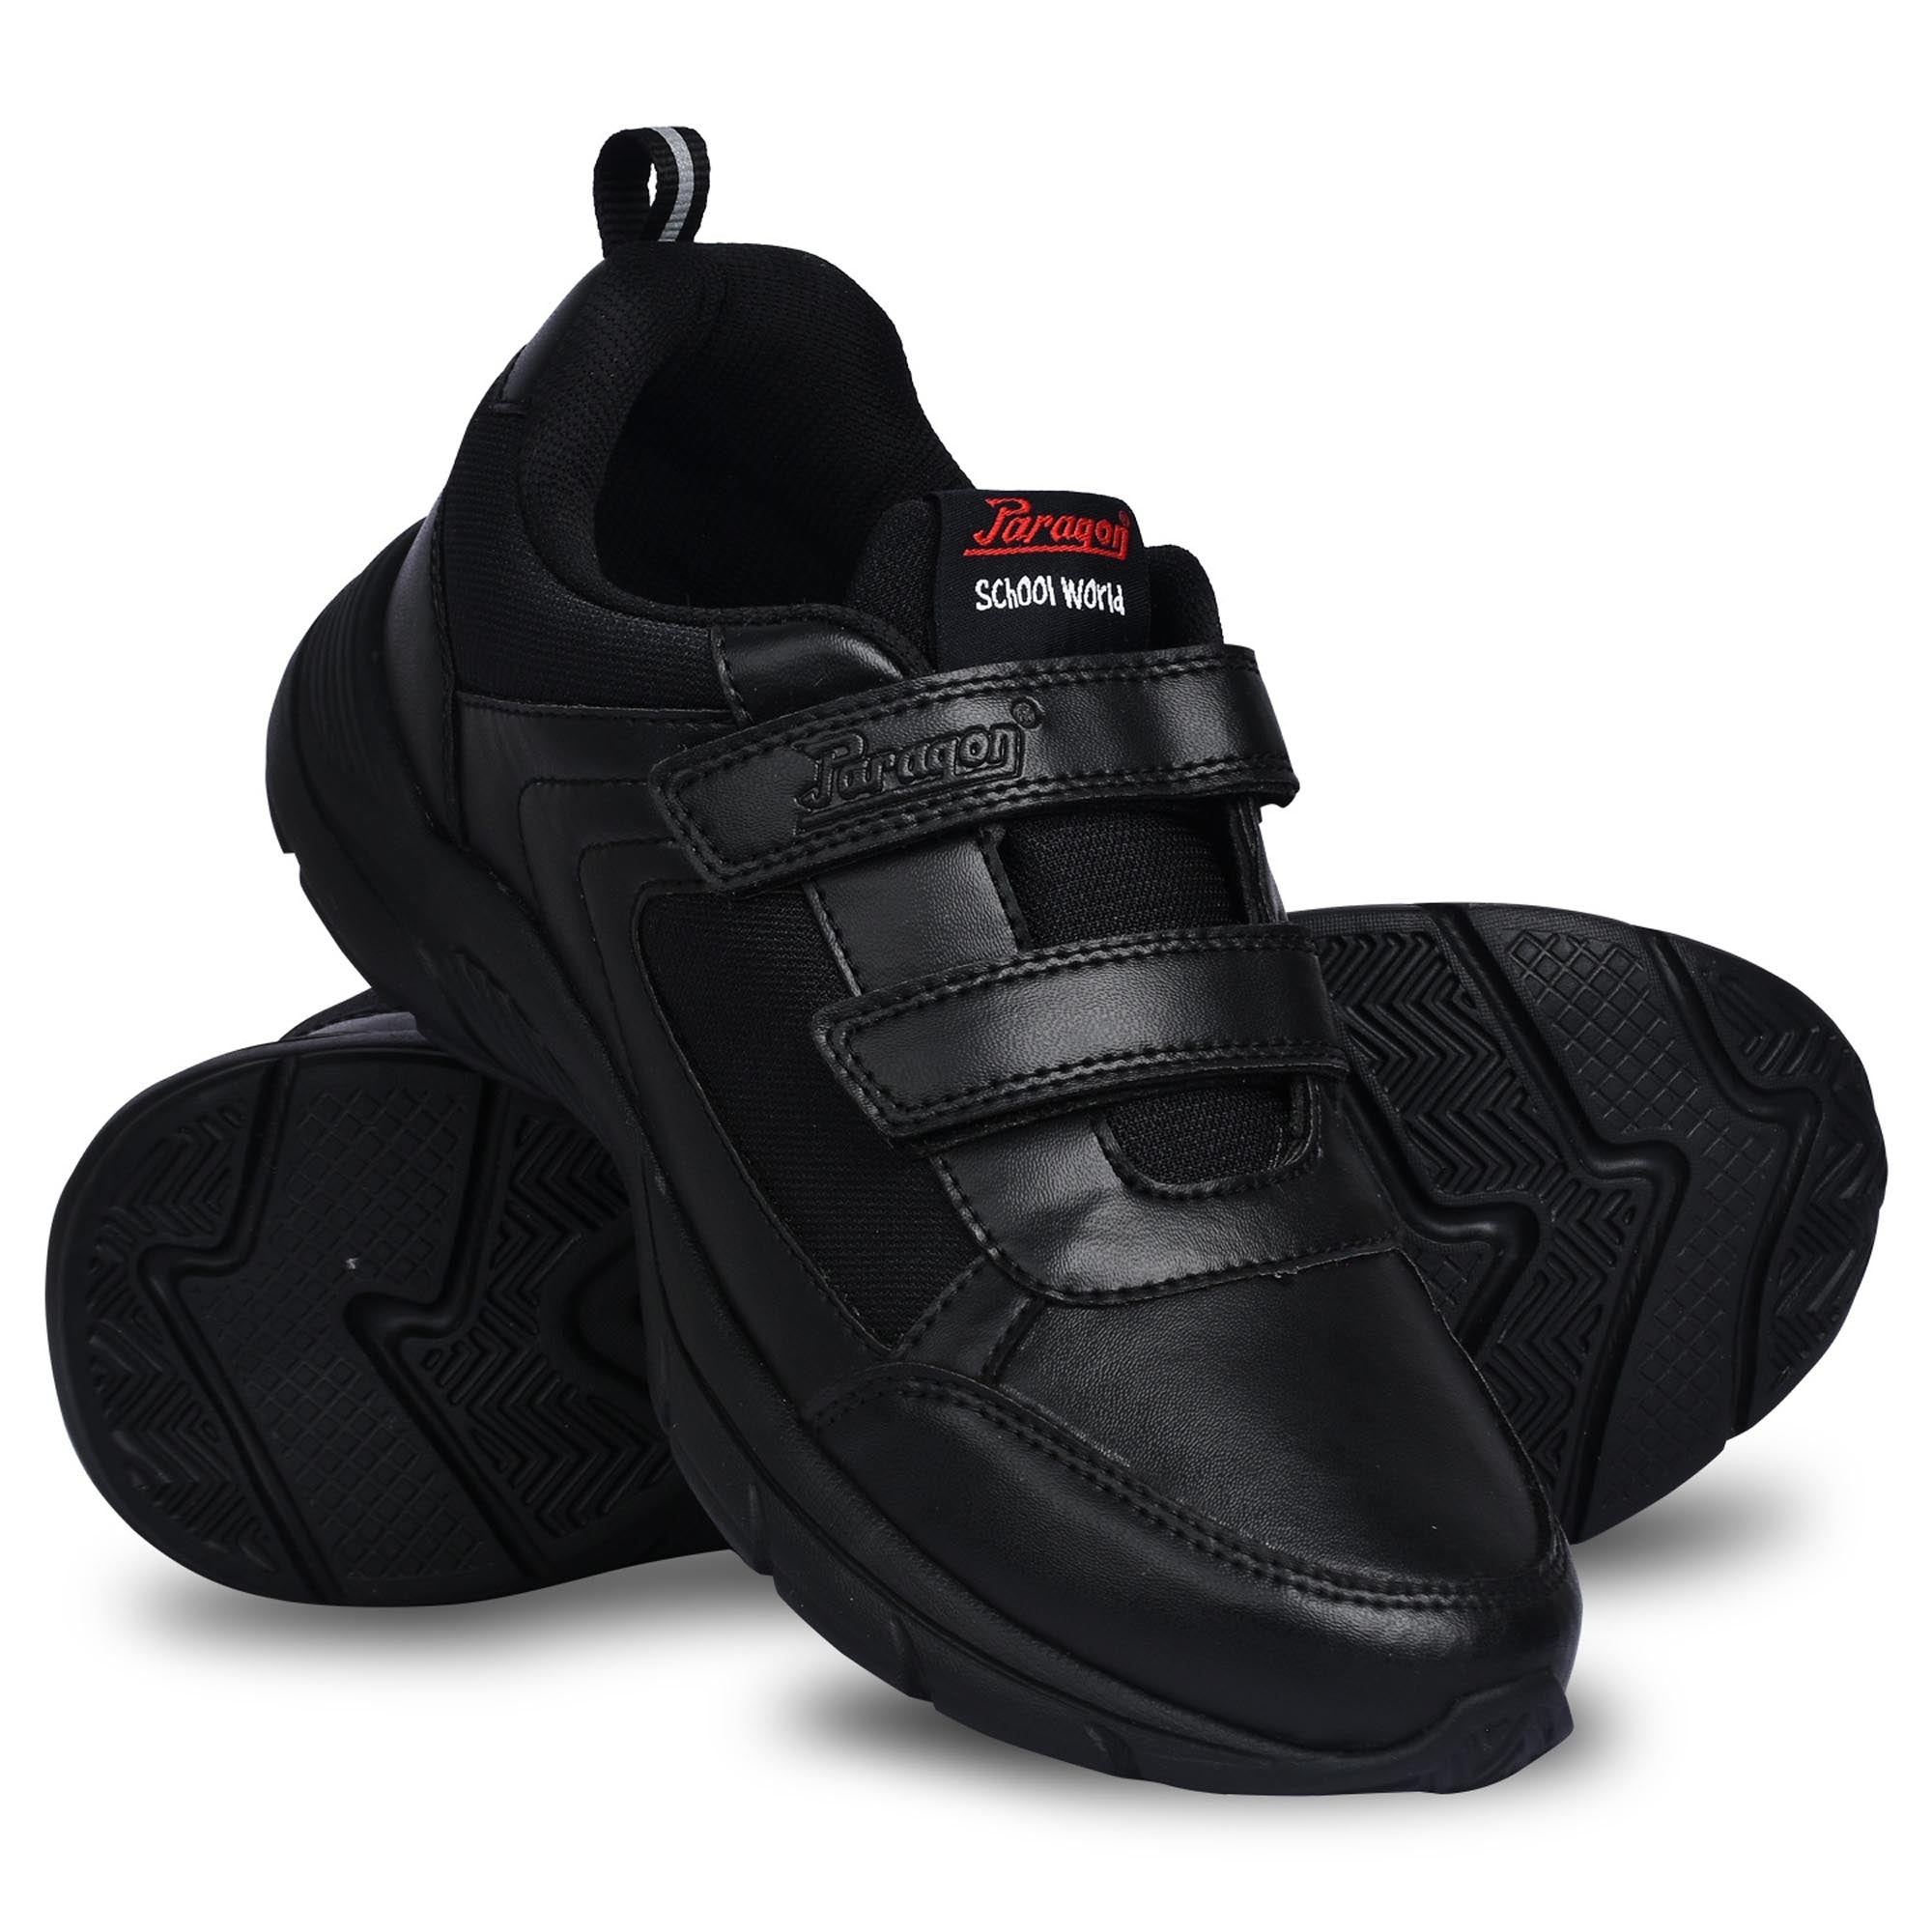 Paragon FBK0774B Kids Boys Girls School Shoes Comfortable Cushioned Soles | Durable | Daily &amp; Occasion wear Black